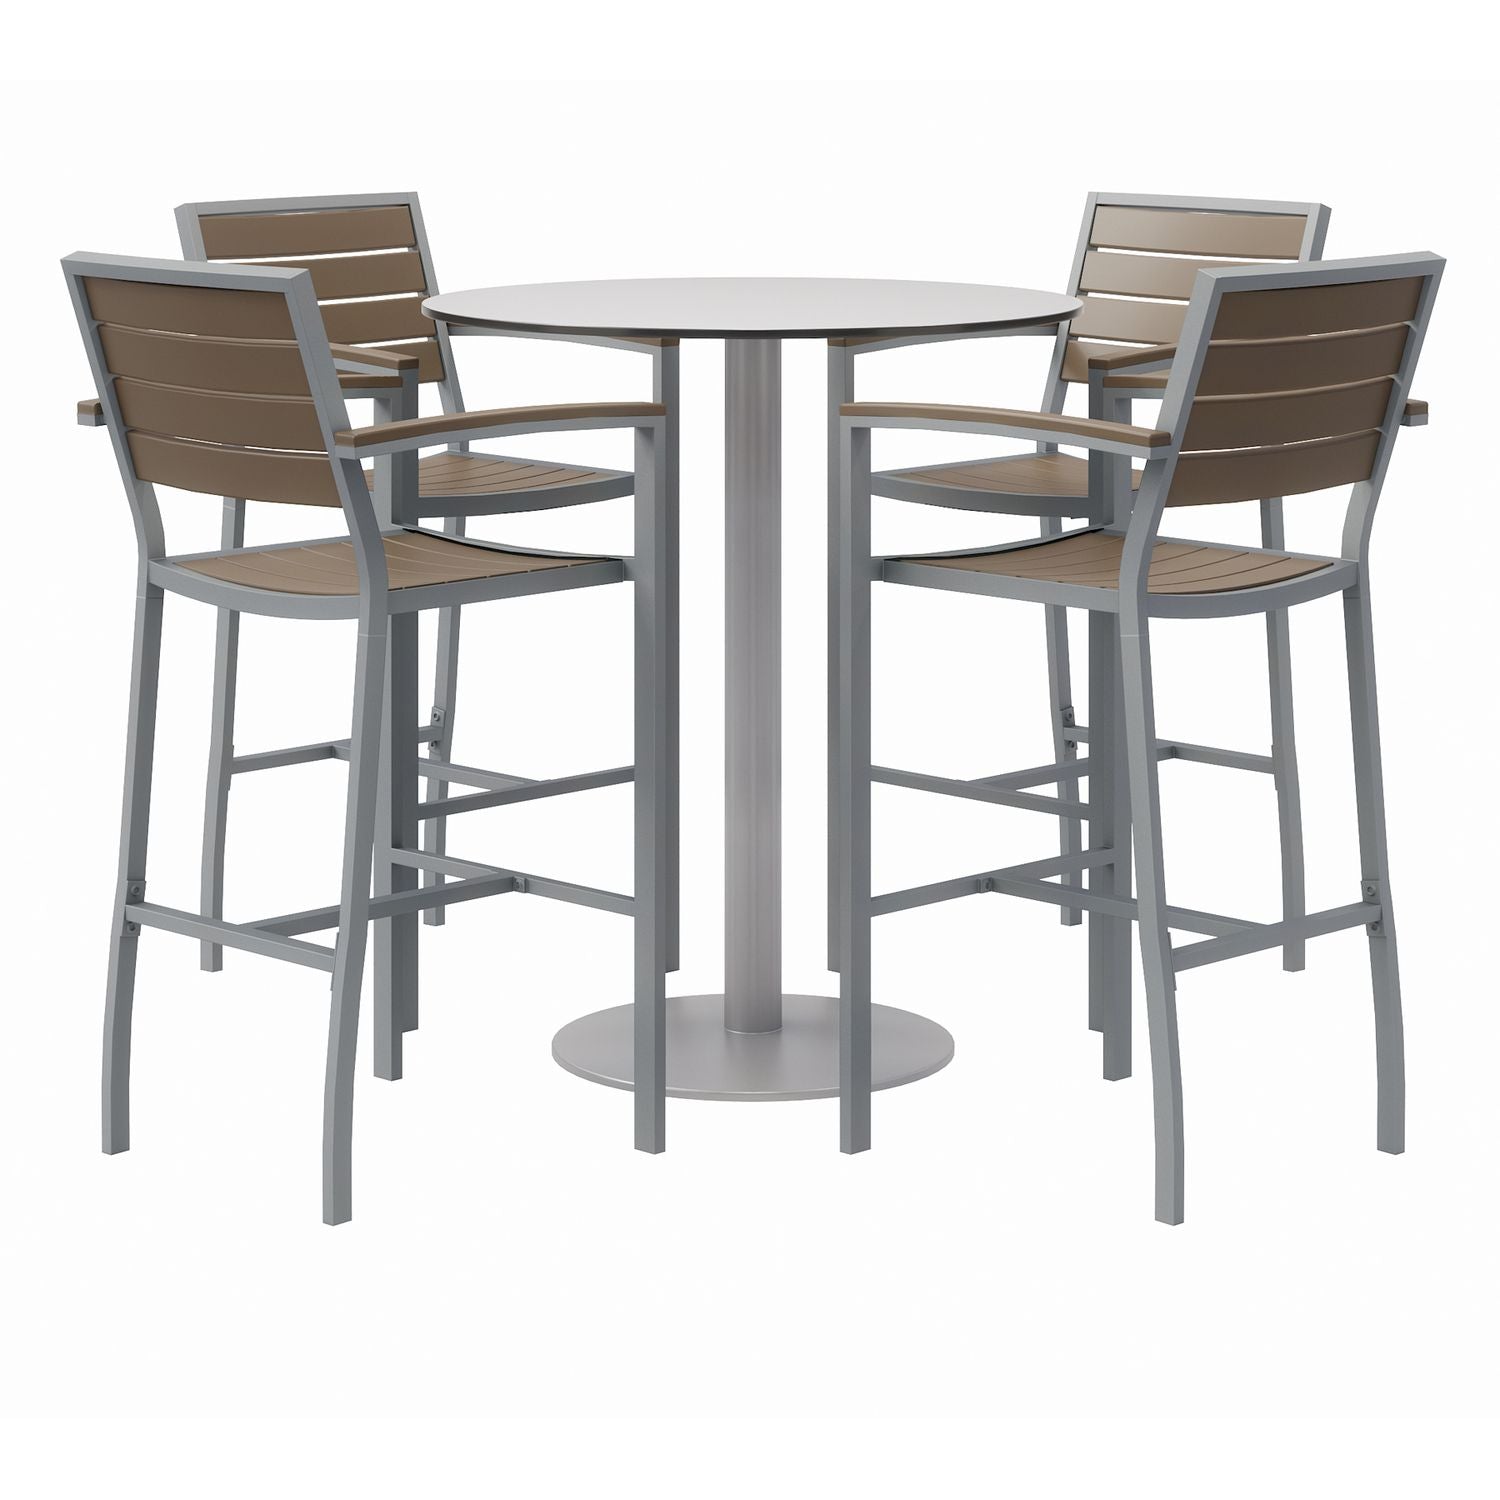 eveleen-outdoor-bistro-patio-table-w-four-mocha-powder-coated-polymer-barstools-round-41h-gray-ships-in-4-6-bus-days_kfi840031918505 - 1